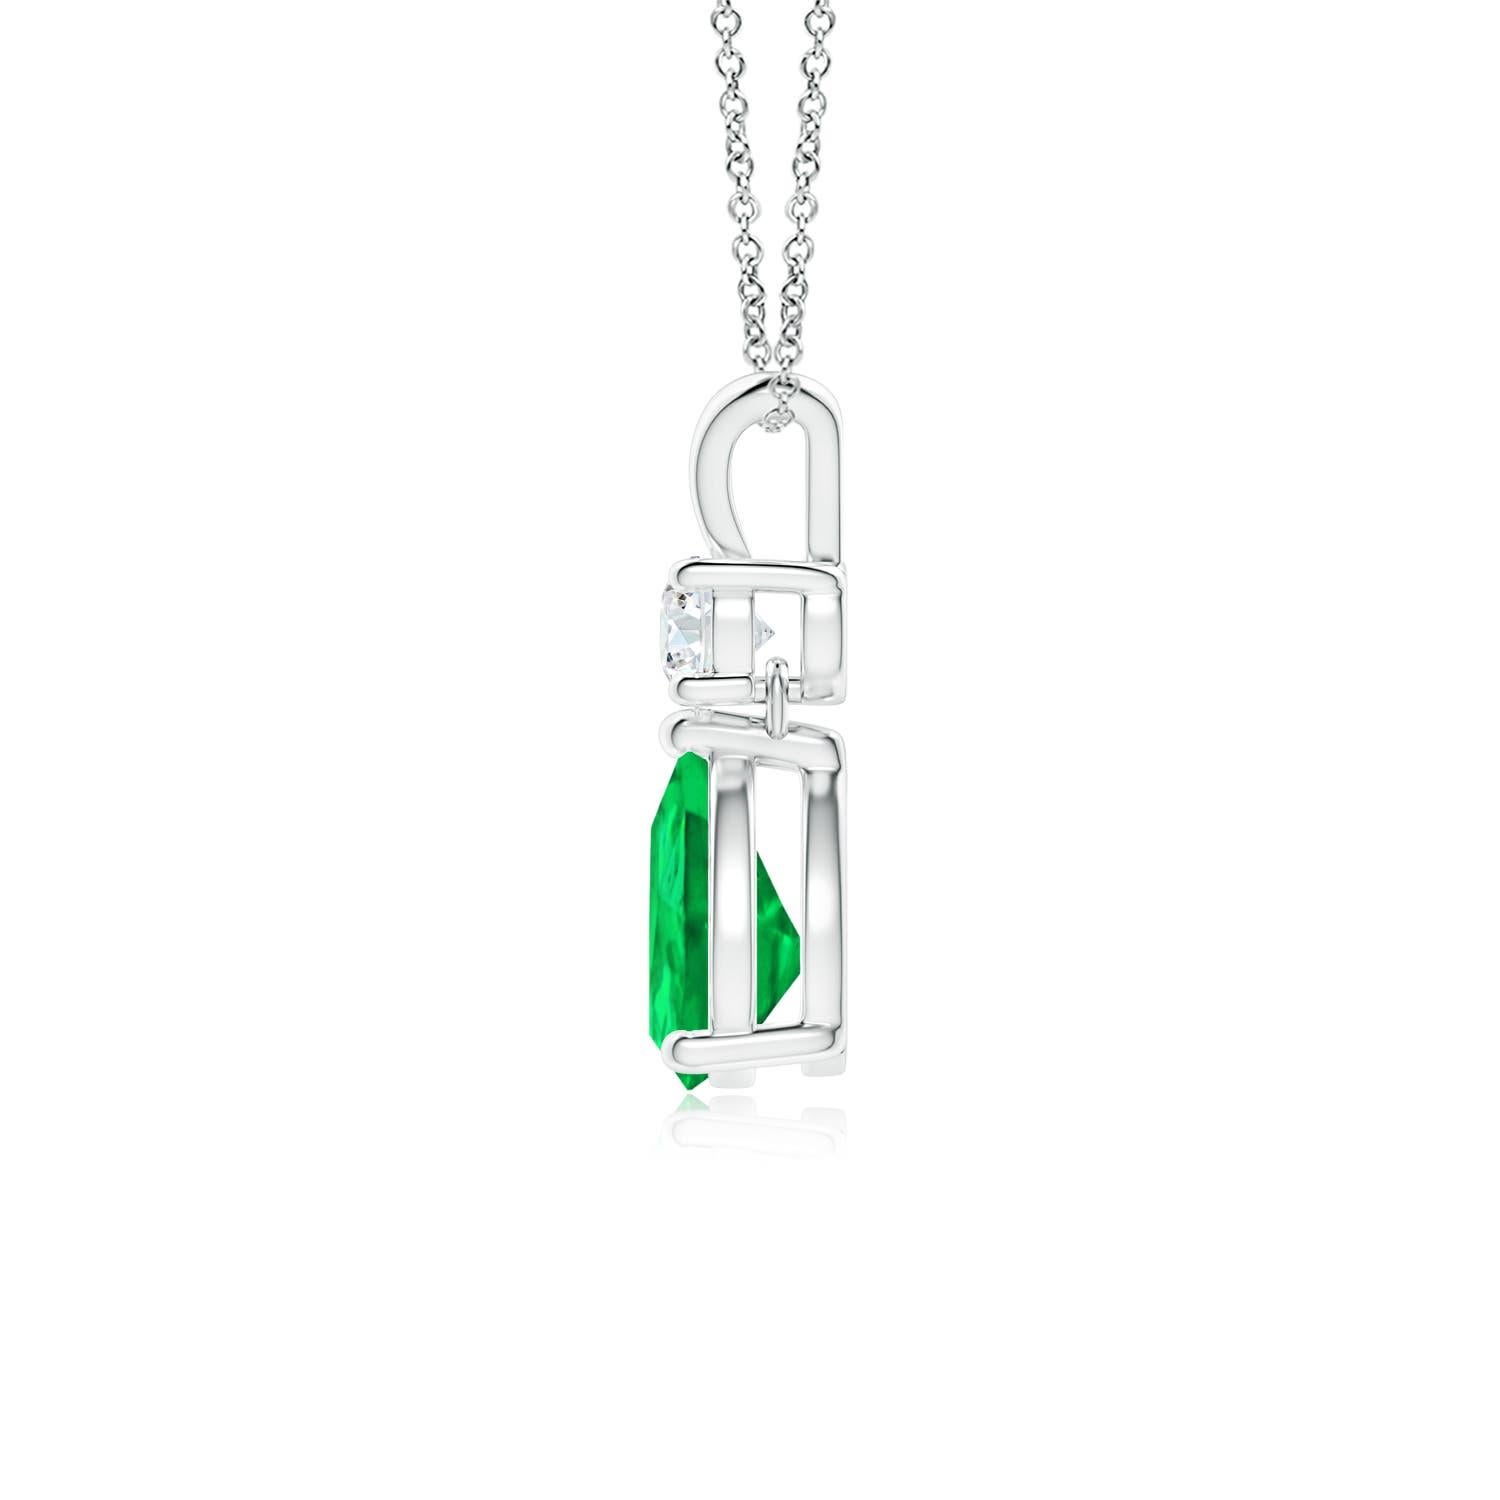 A vivid green pear cut emerald dangles from a sparkling white diamond on this elegant drop pendant. The lustrous V bale adds beauty to this 14k white gold emerald and diamond pendant. It exudes luxurious charm with its remarkable long drop